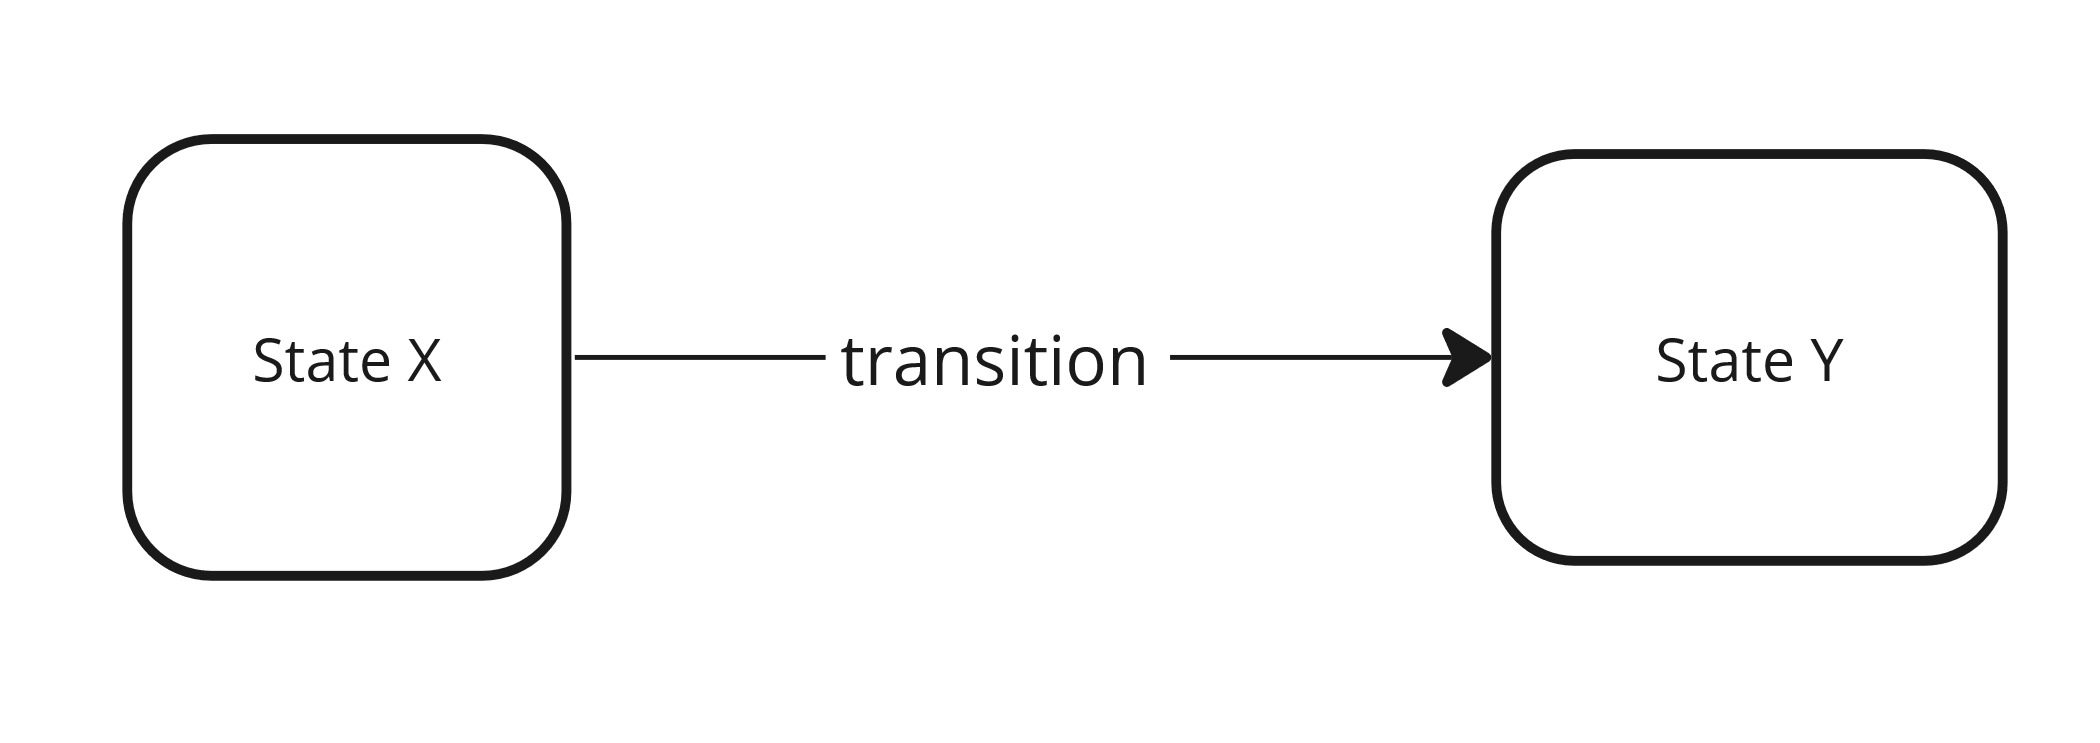 System - states and transitions